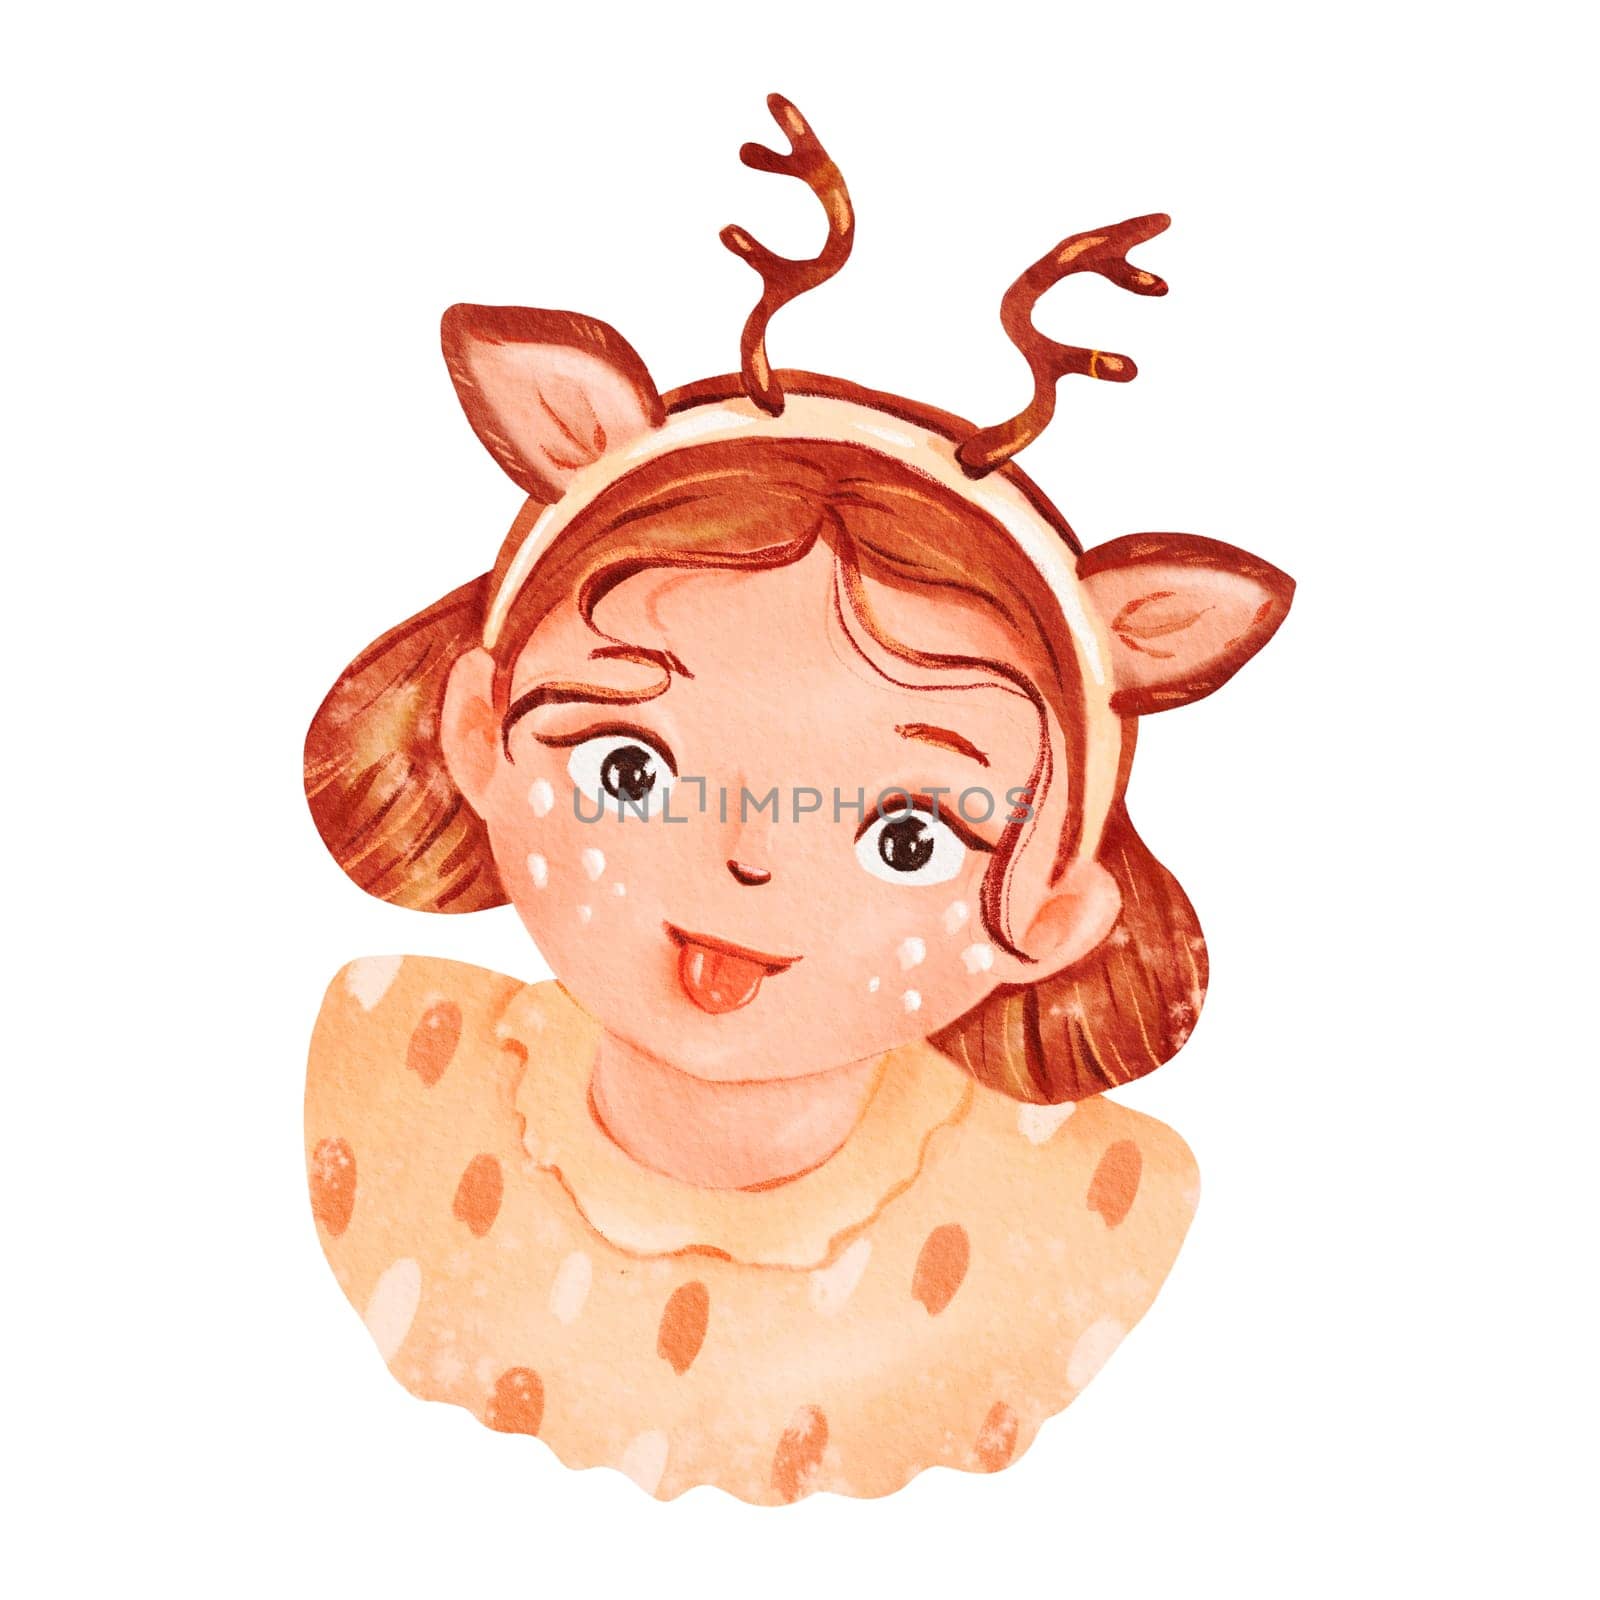 A happy little girl with peach cheeks and antler headband, resembling a fictional character, is wearing an ornament on her head. She is finger painting with eyelash details